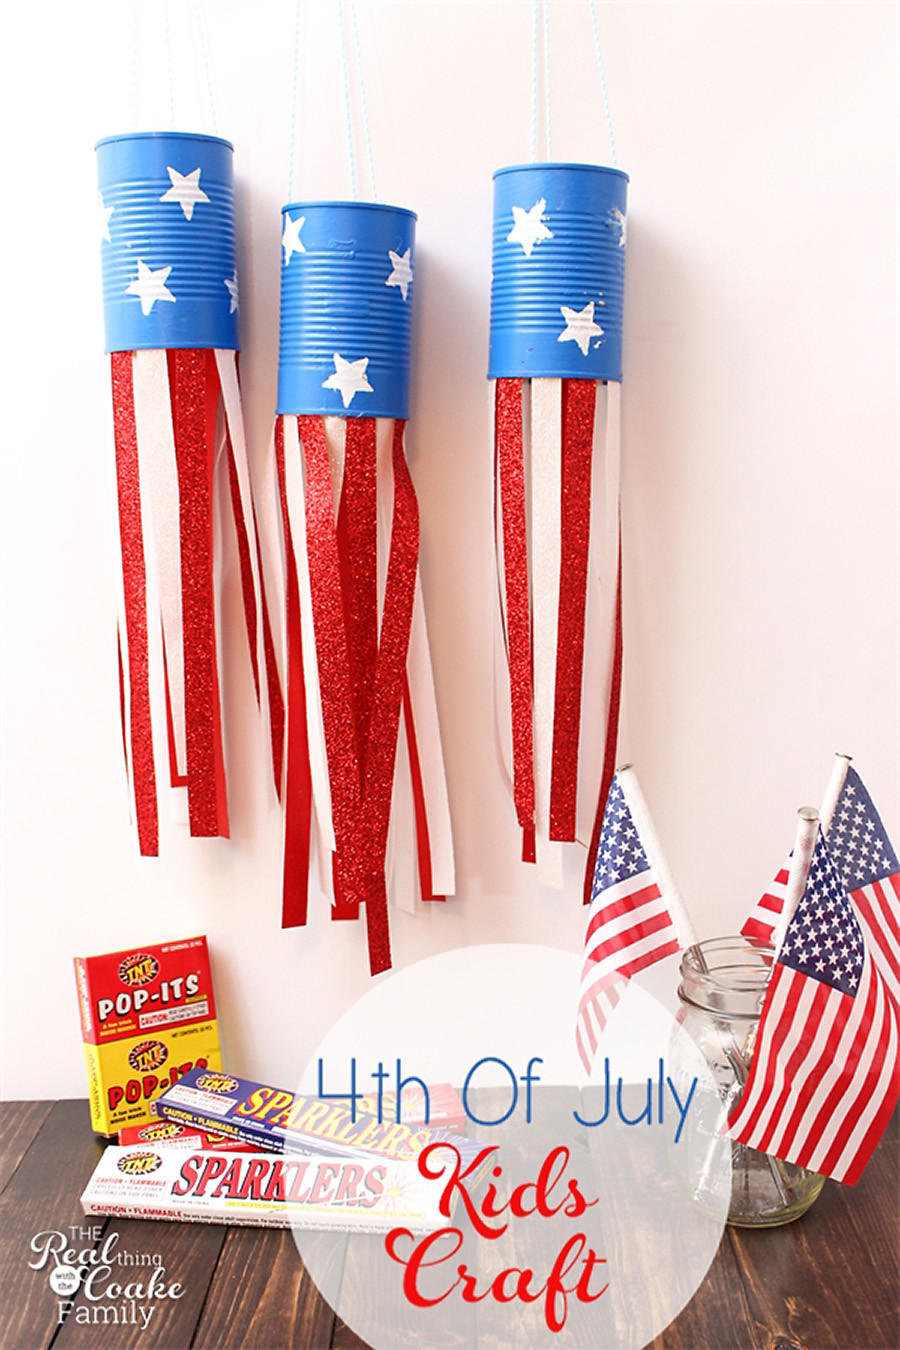 4Th Of July Crafts For Kids
 10 Fun and Free 4th of July Crafts for Kids Our